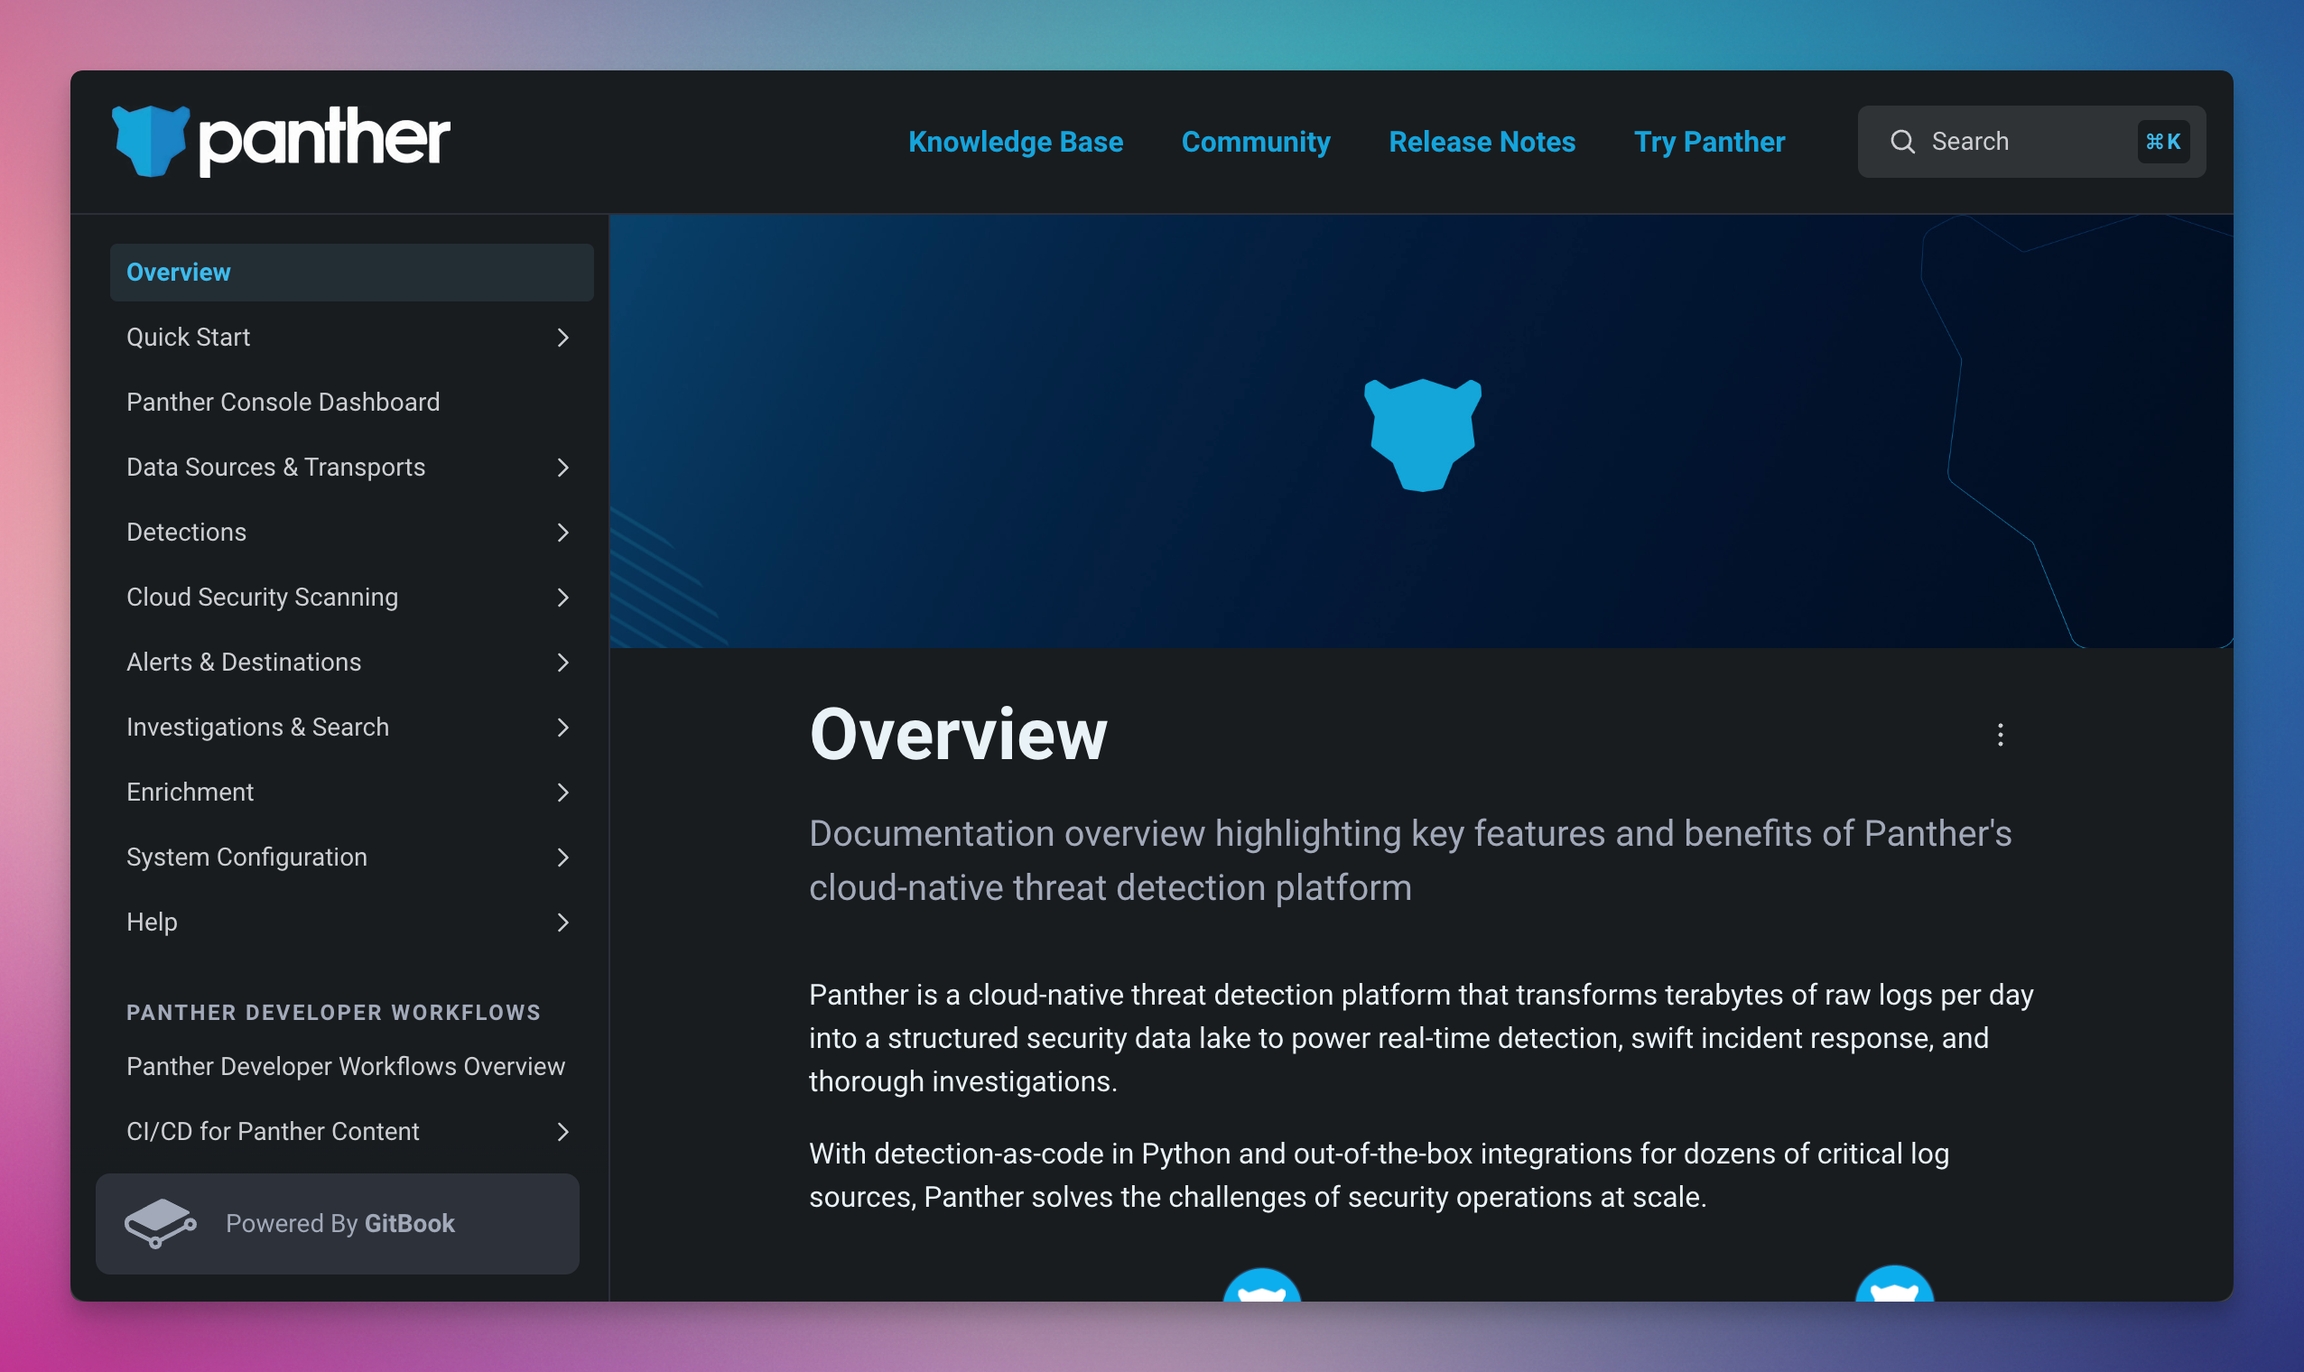 A screenshot of the documentation landing page for Panther